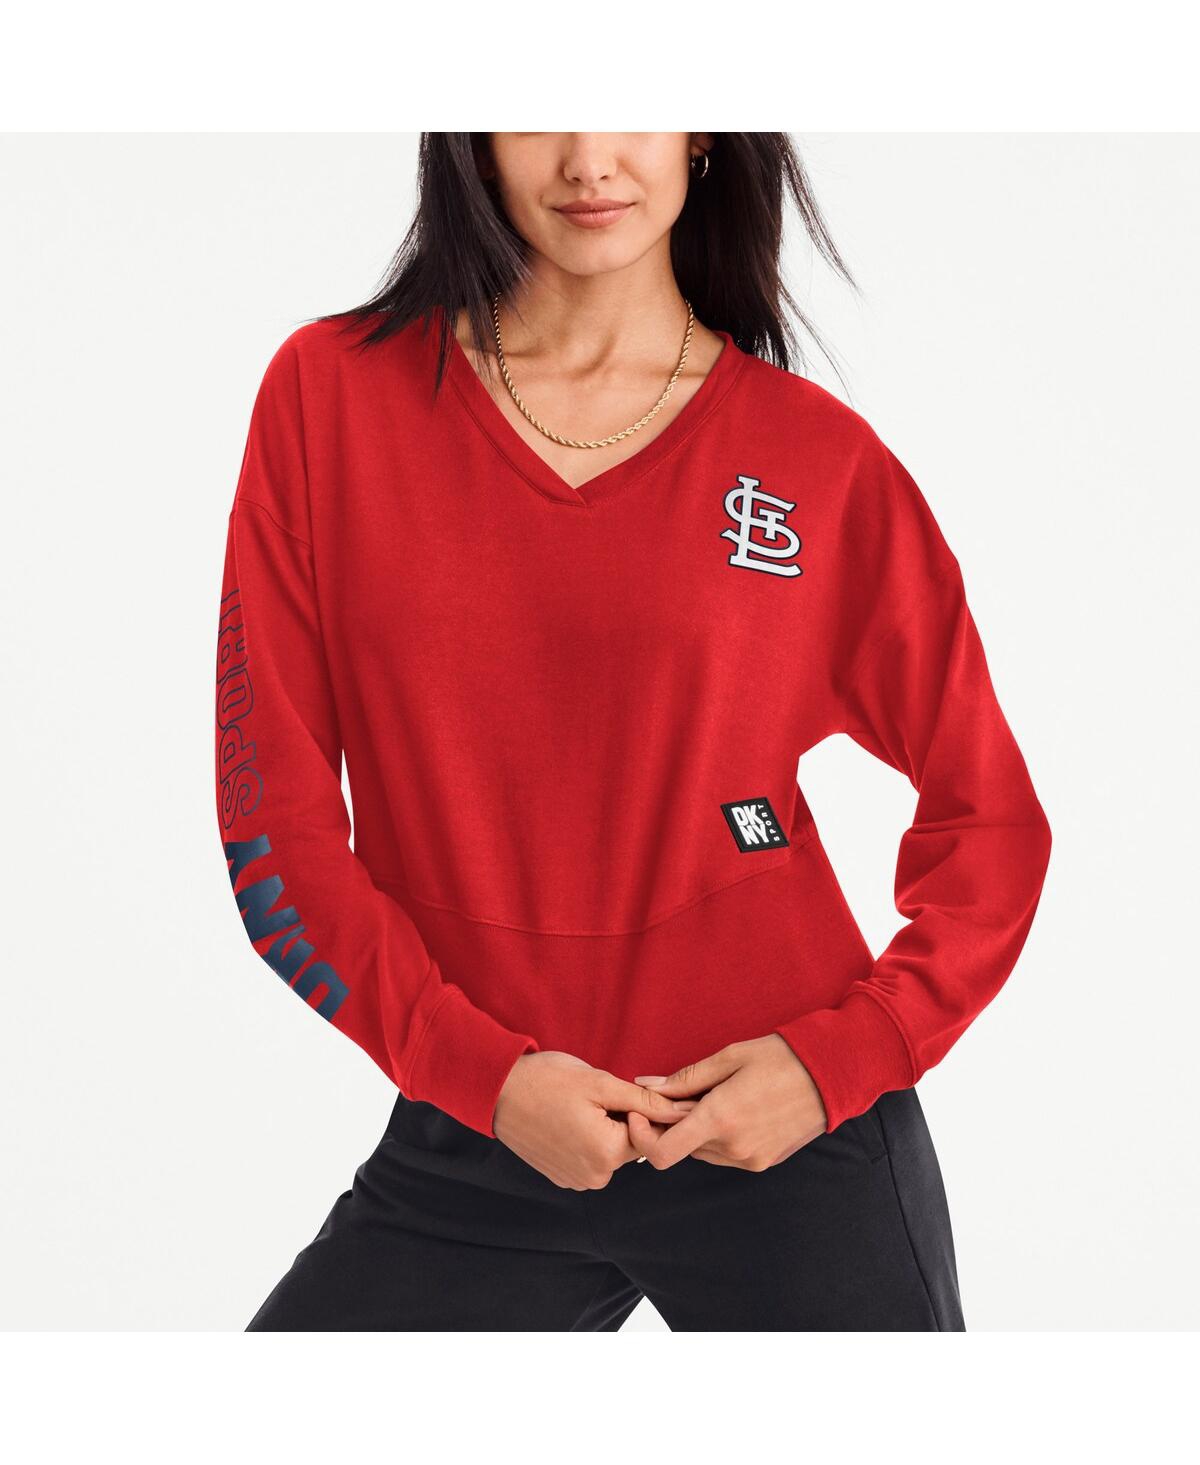 Dkny Women's  Sport Red St. Louis Cardinals Lily V-neck Pullover Sweatshirt